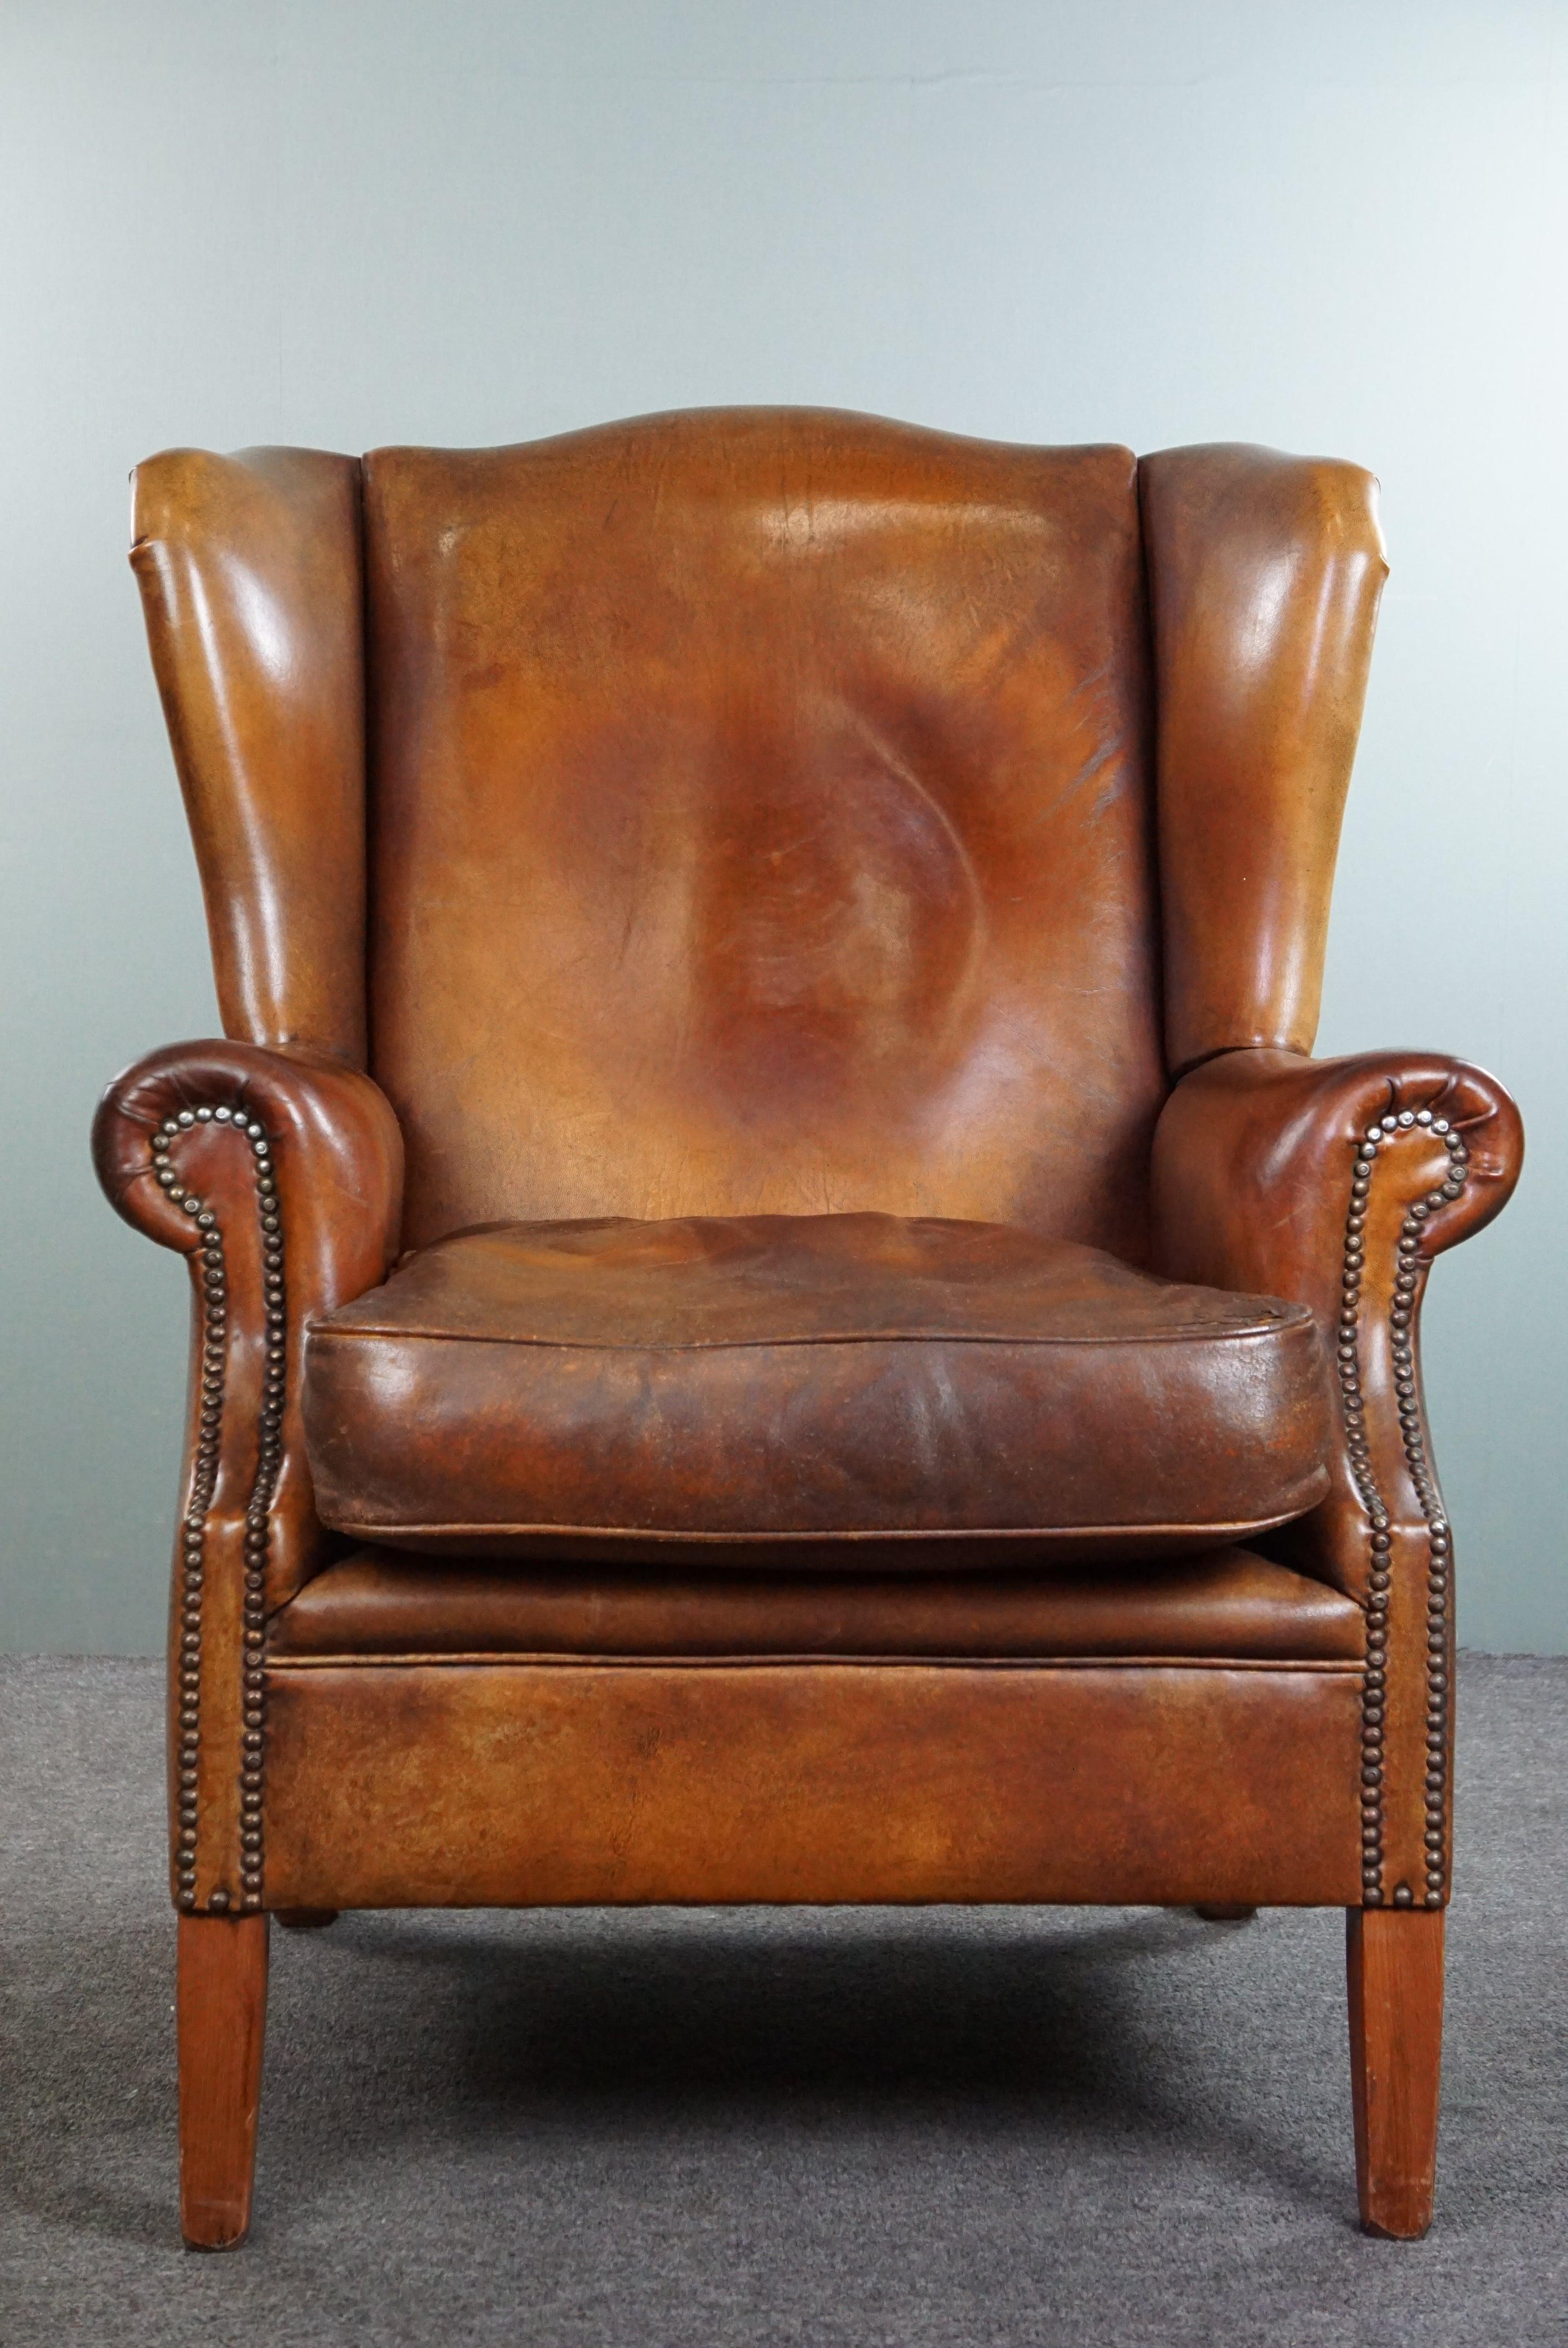 Offered is this very rugged yet comfortable wingback armchair made of cognac-colored sheep leather finished with decorative nail heads. 

Despite its rugged appearance, this is still a wonderfully comfortable armchair to relax in for hours. Even as